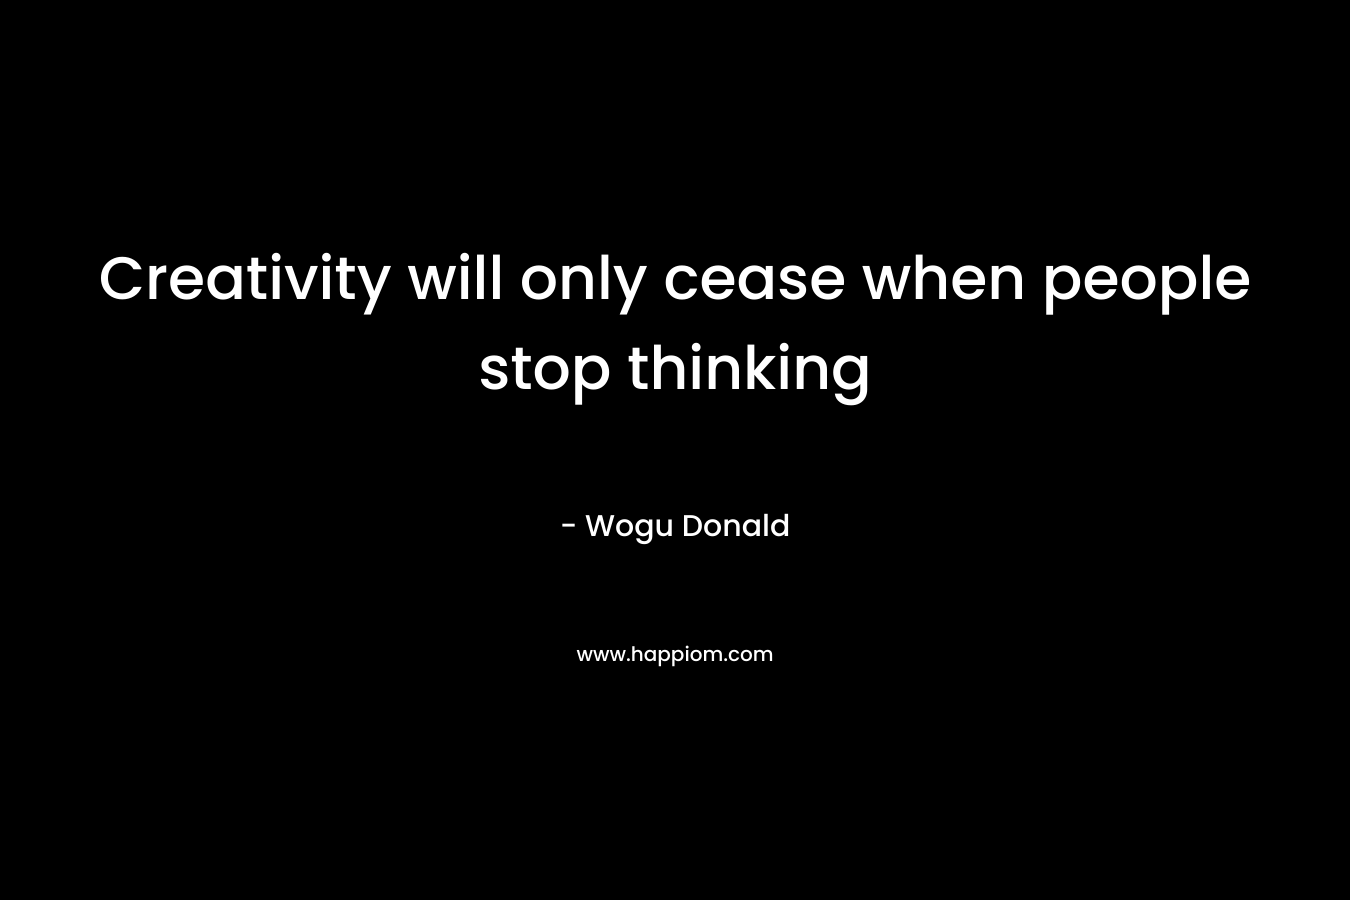 Creativity will only cease when people stop thinking – Wogu Donald